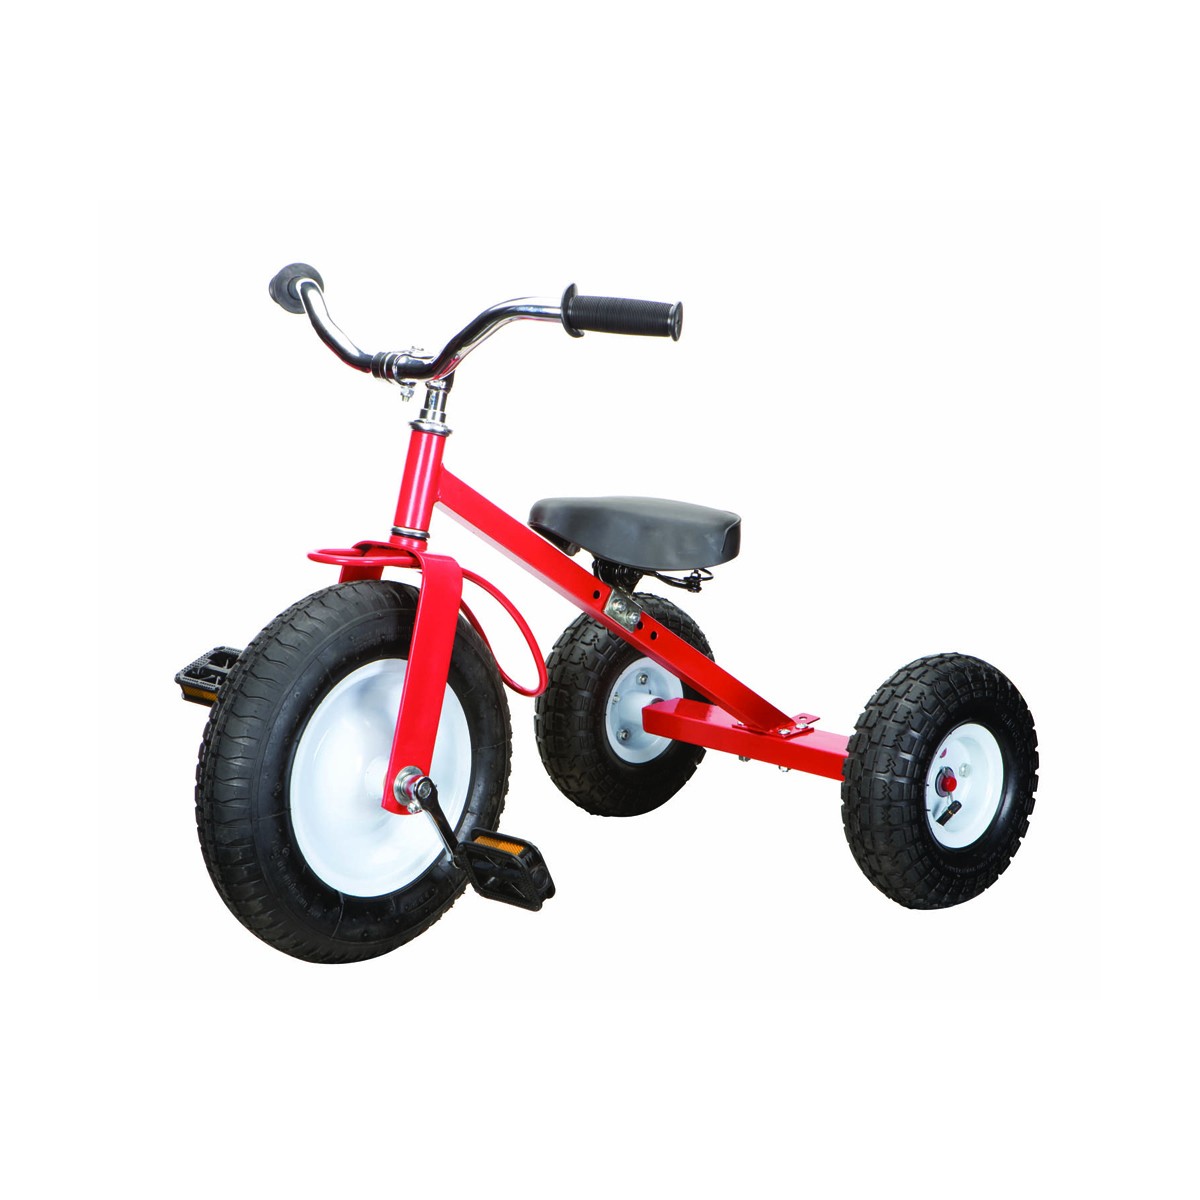 Tiny Tike has decided to make 288 tricycles each day. How many tricycle  seats, wheels, and pedals are needed?